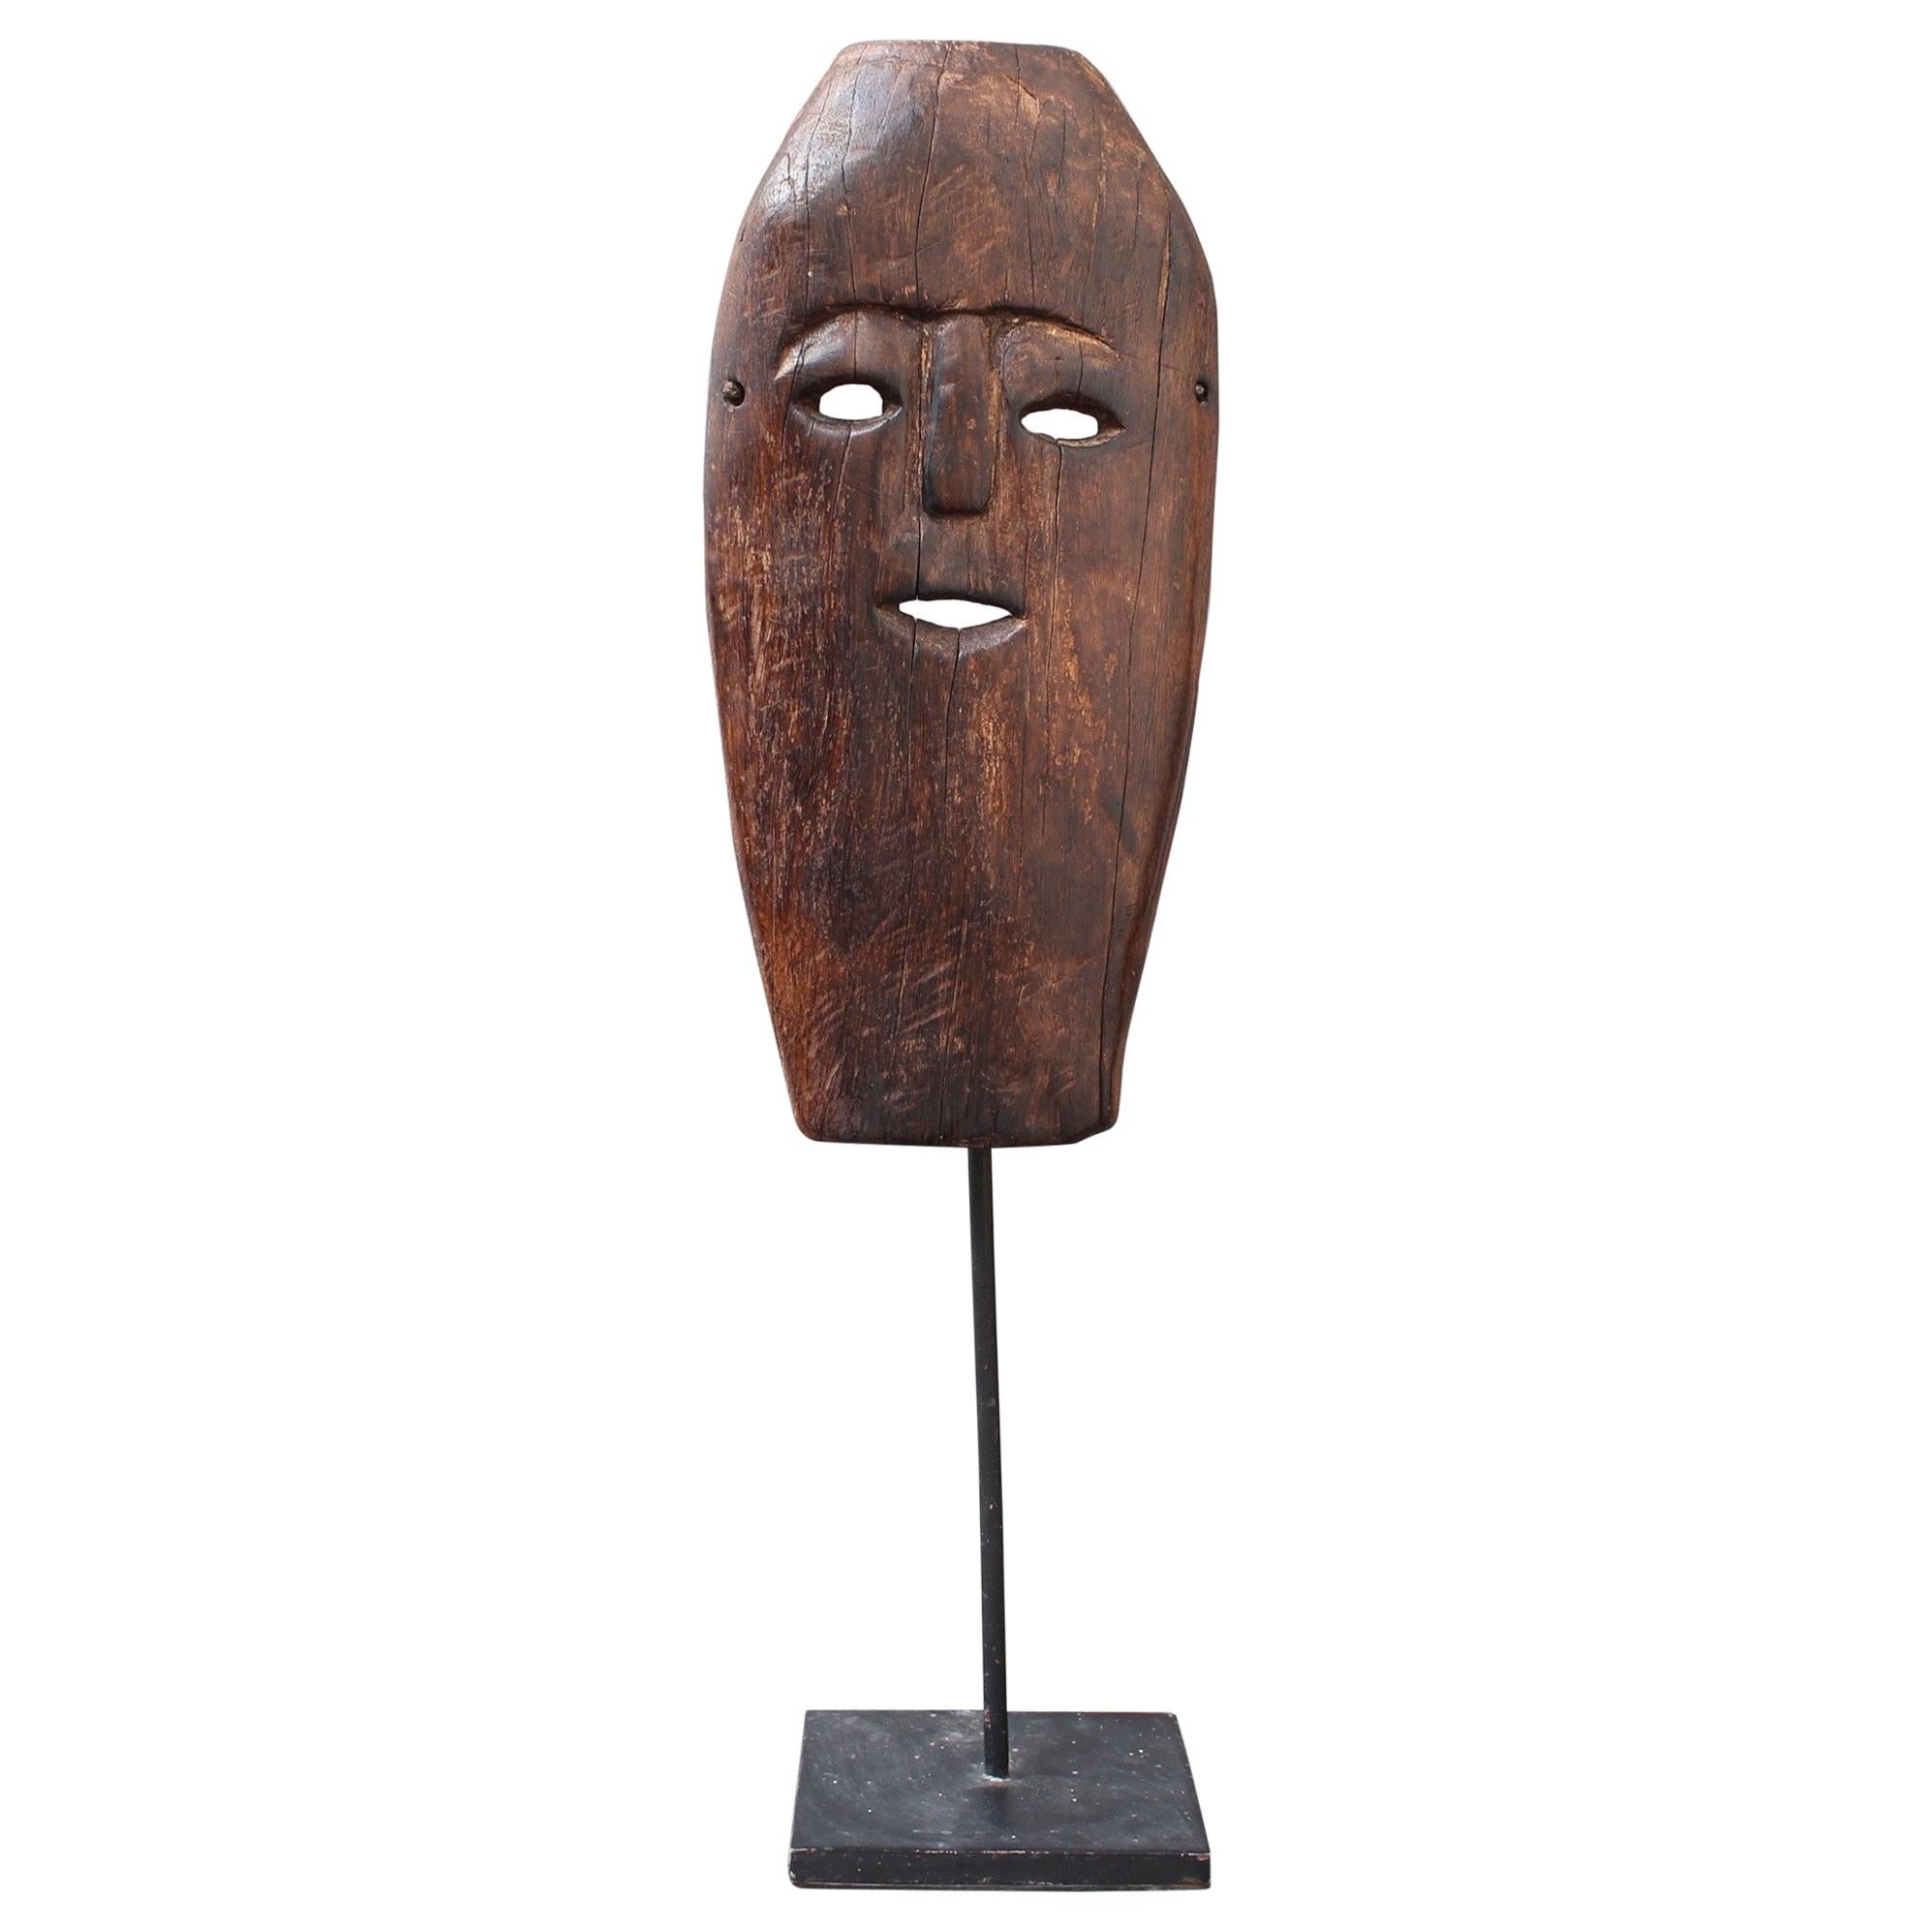 Midcentury Sculpted Wooden Traditional Mask from Timor Island, Indonesia